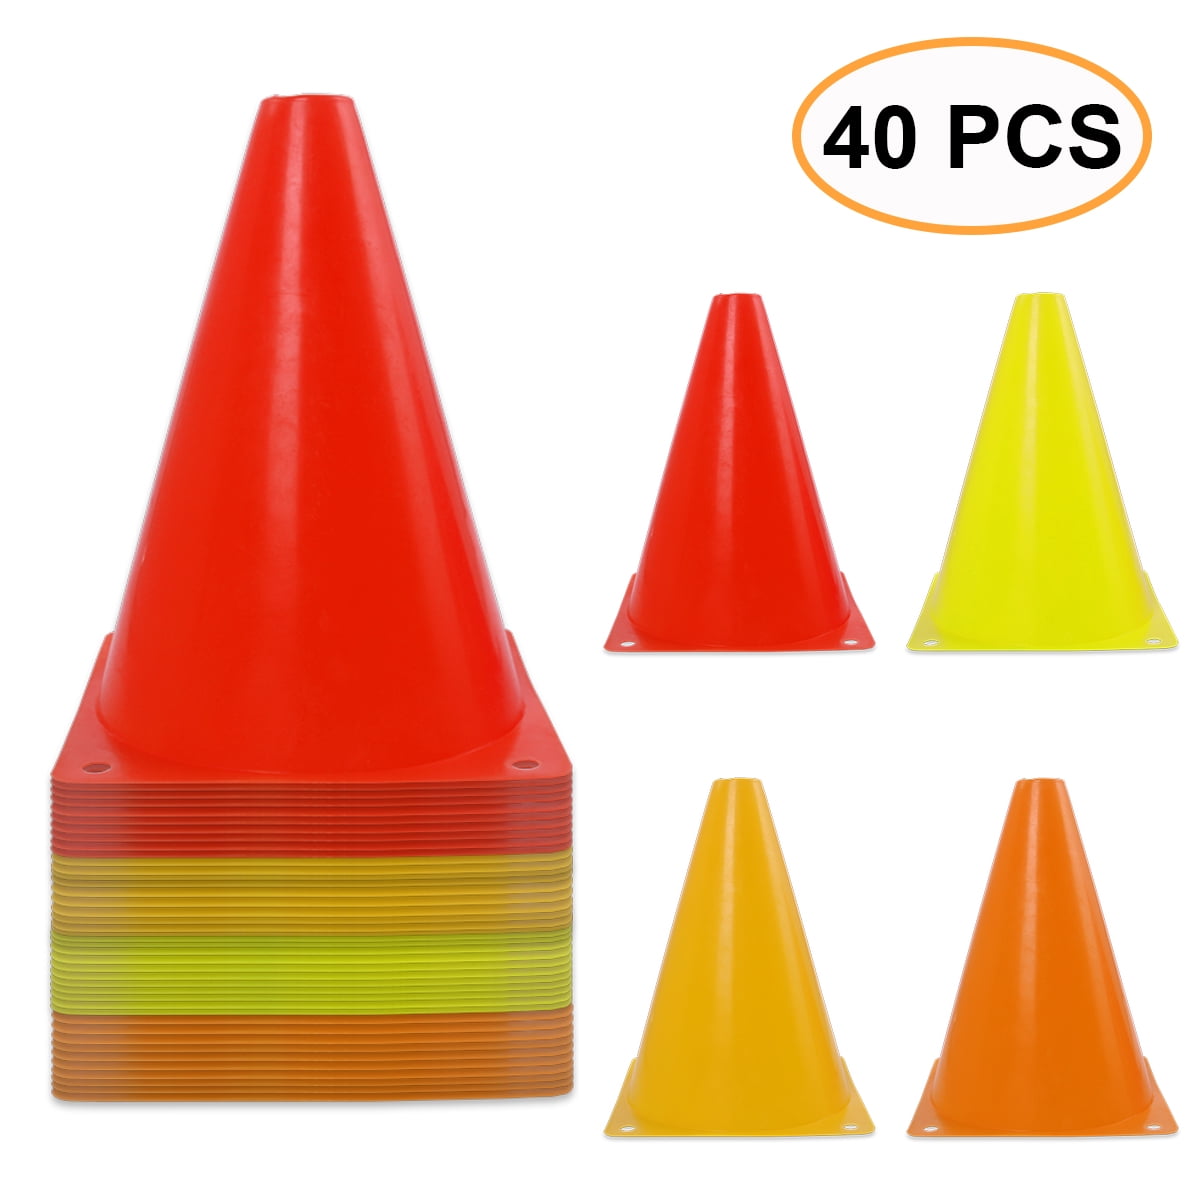 Skating Basketball Indoor and Outdoor Games MNBD Plastic Traffic Cones Sport Training Marker Cone for Soccer Football